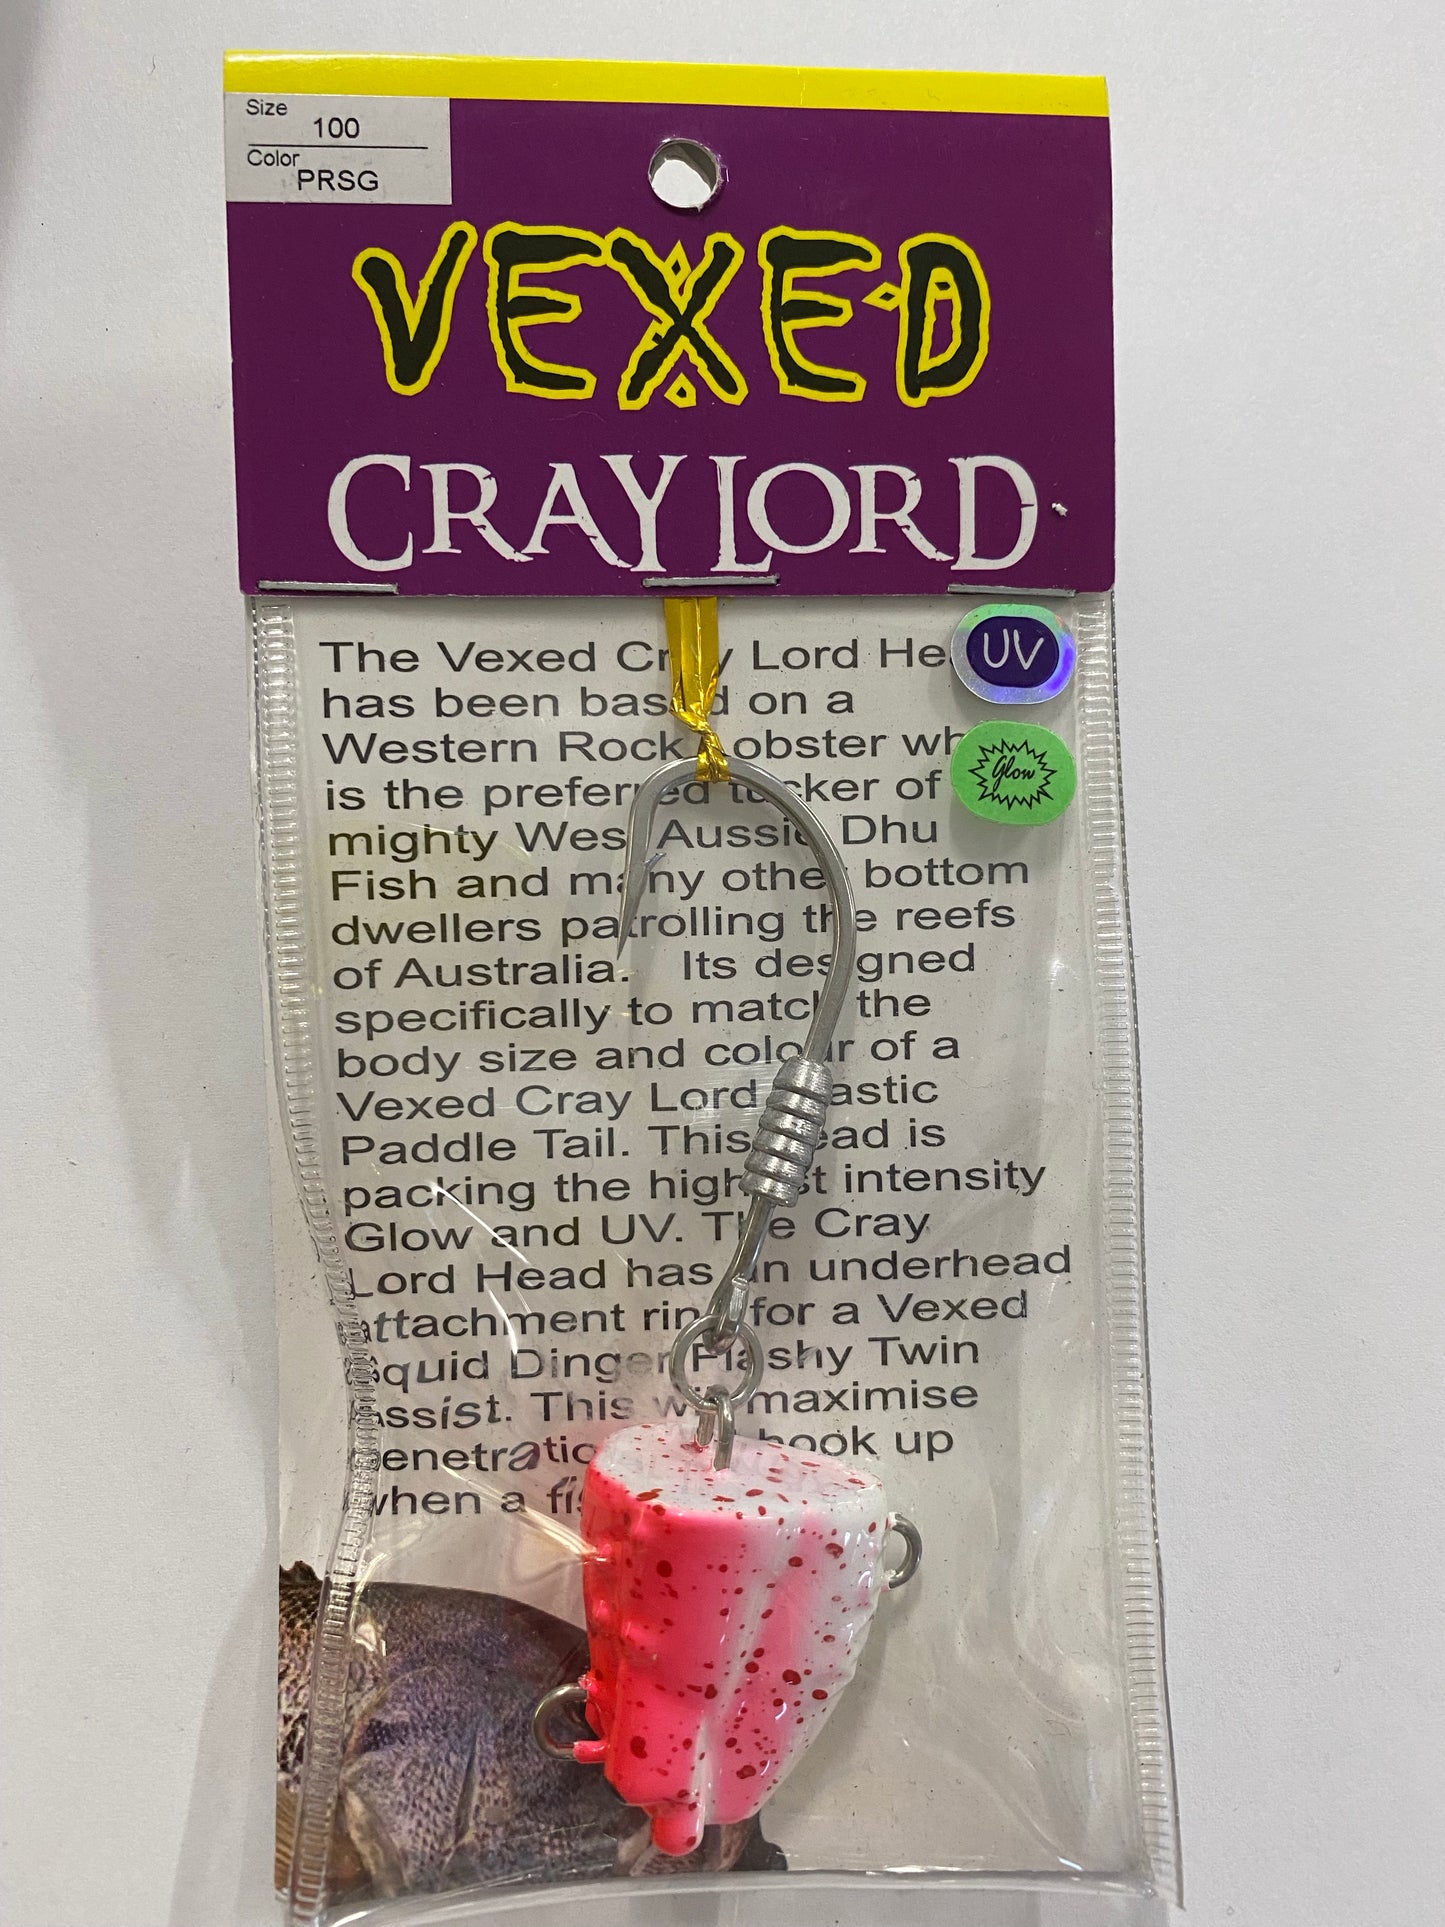 Vexed Cray Lord 100g PRSG